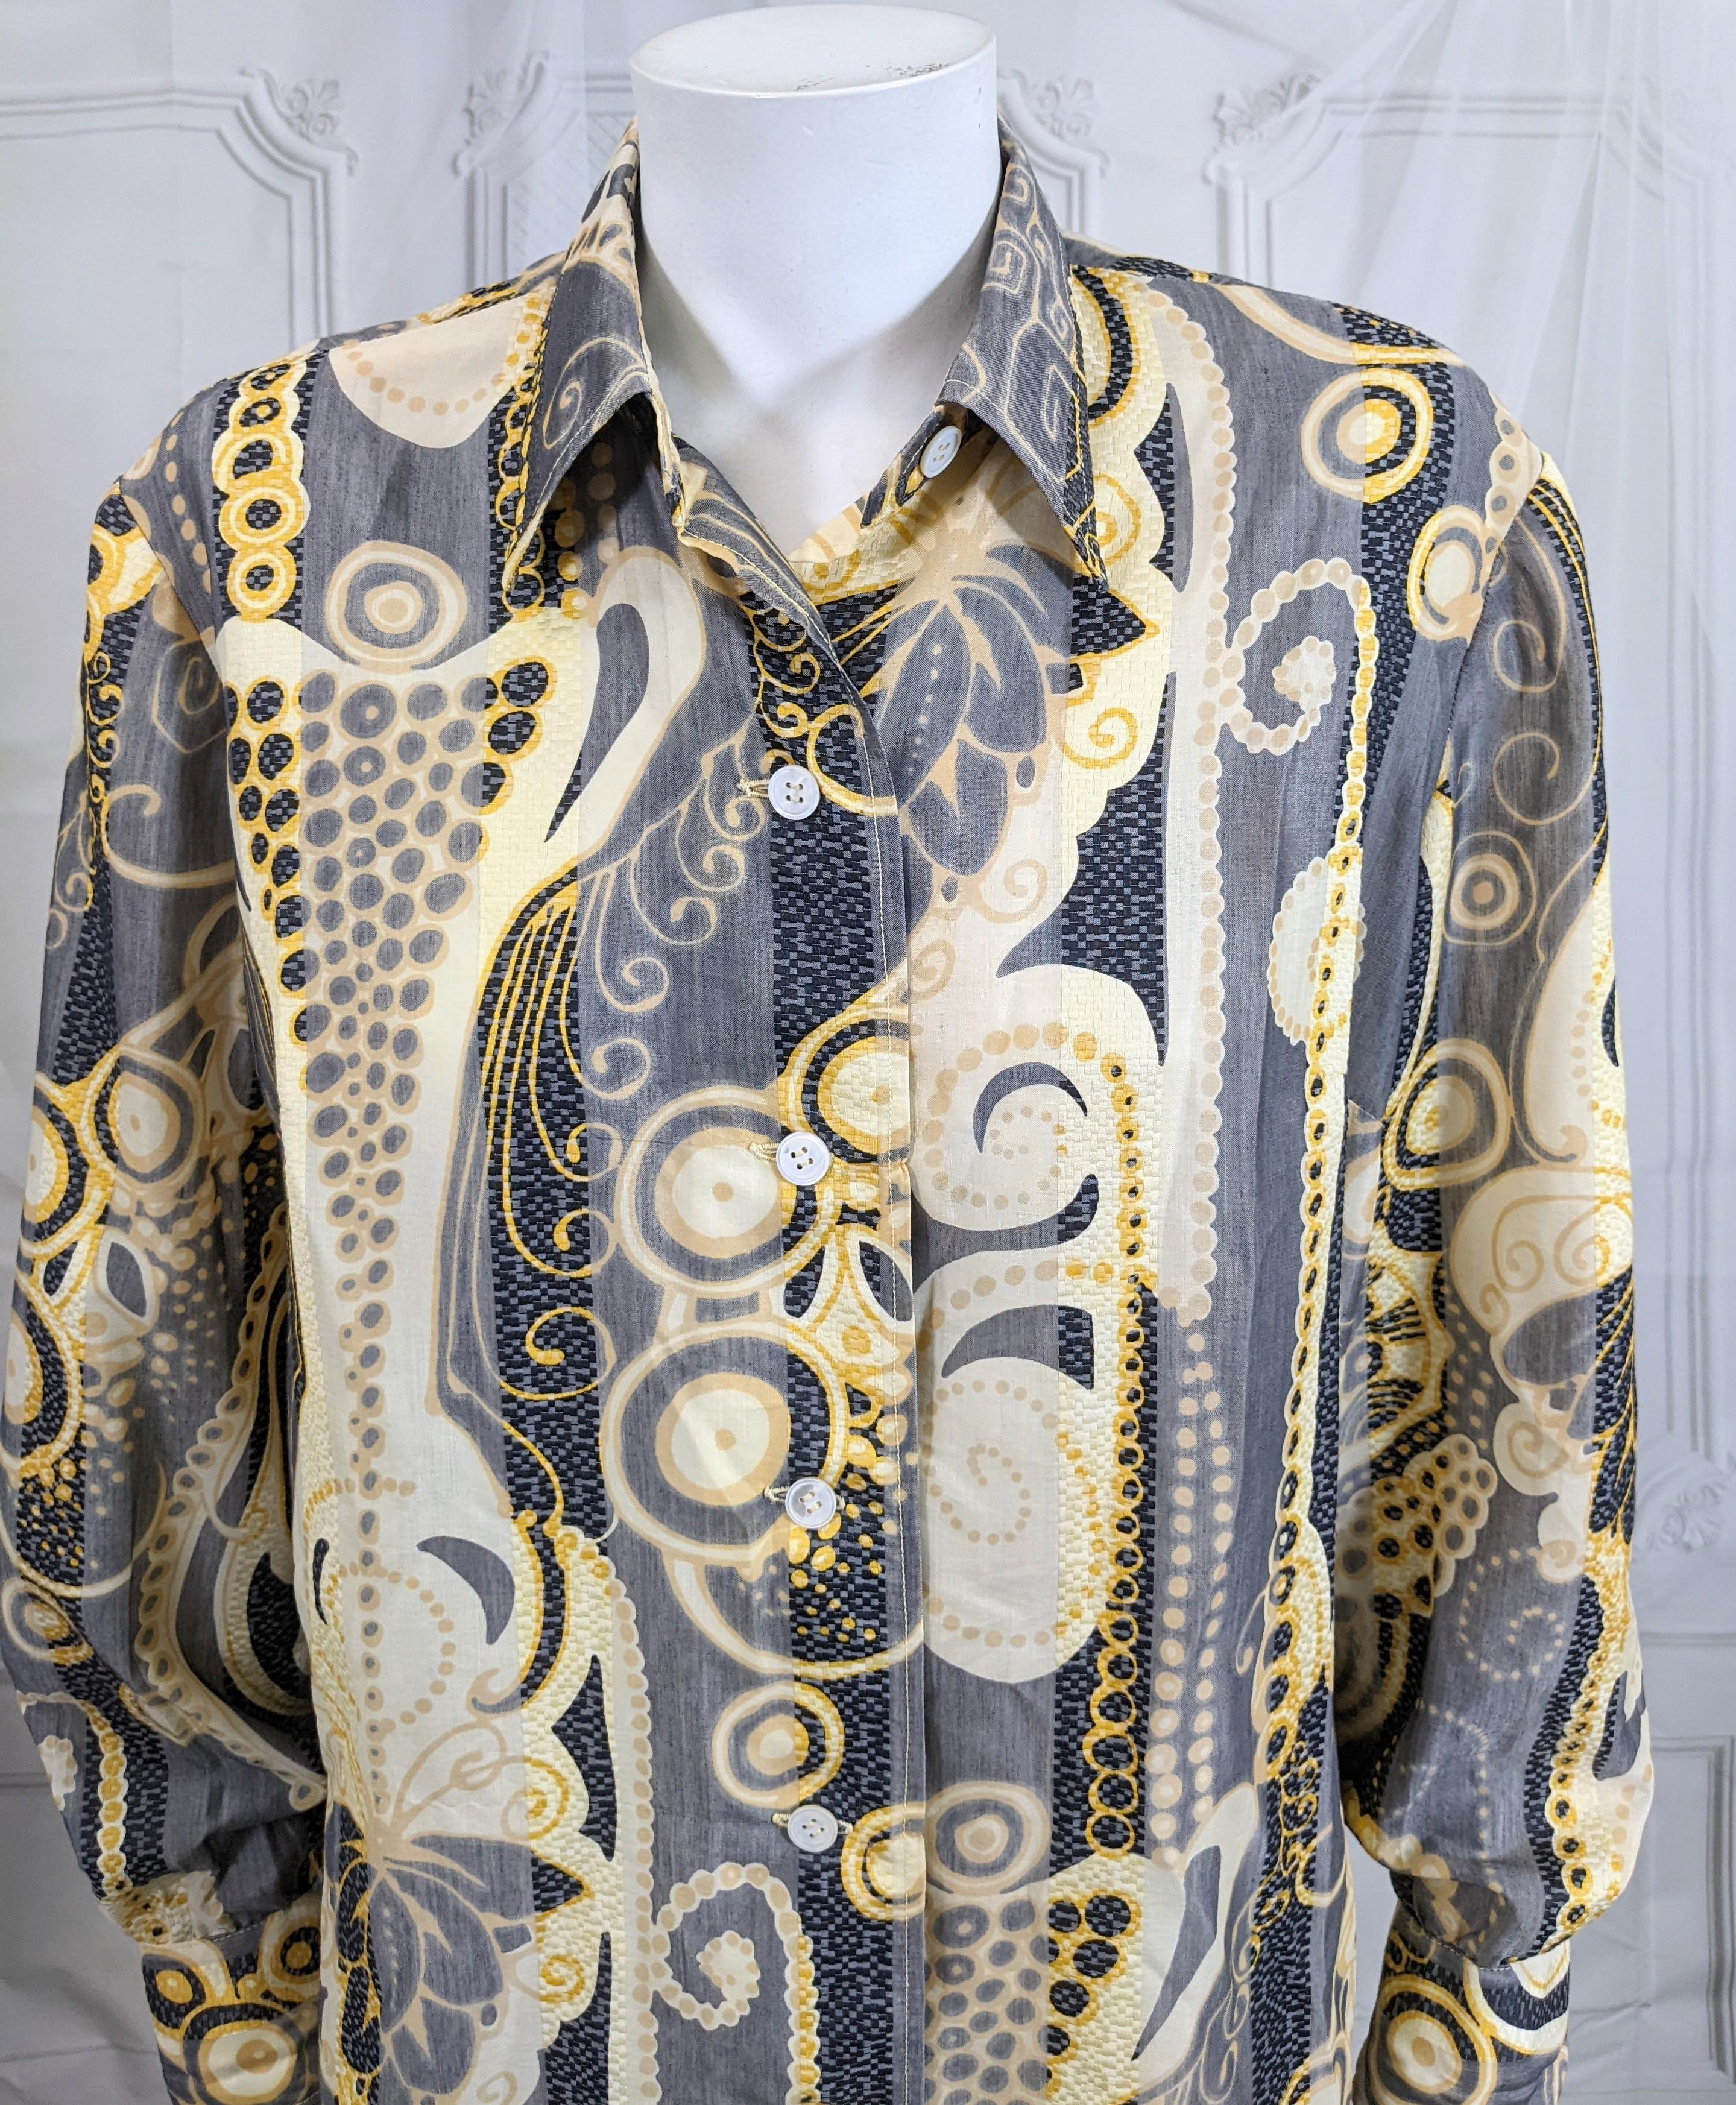 J. Tiktiner Silk Print Shirtwaist In Good Condition For Sale In New York, NY